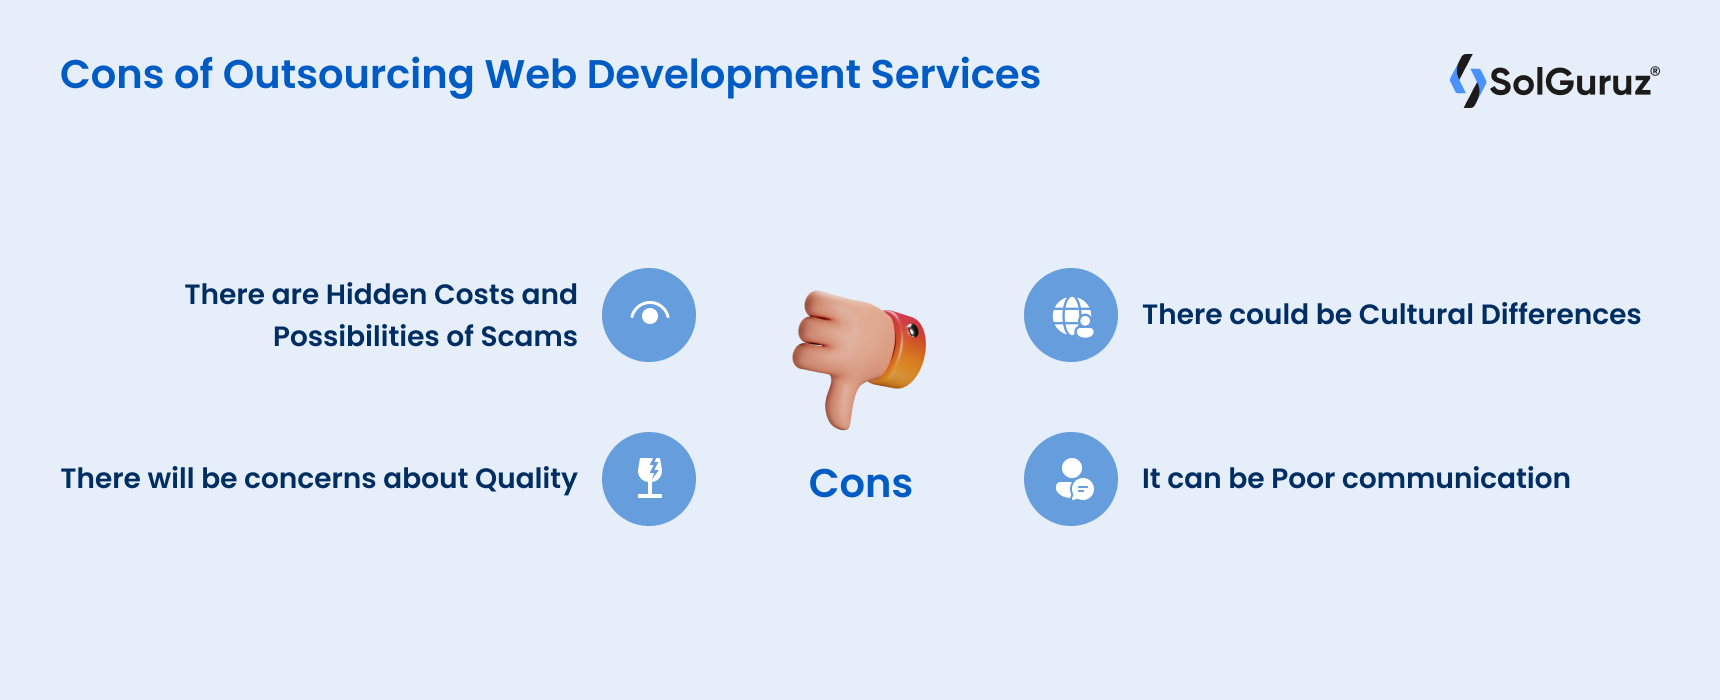 Cons of Outsourcing Web Development Services